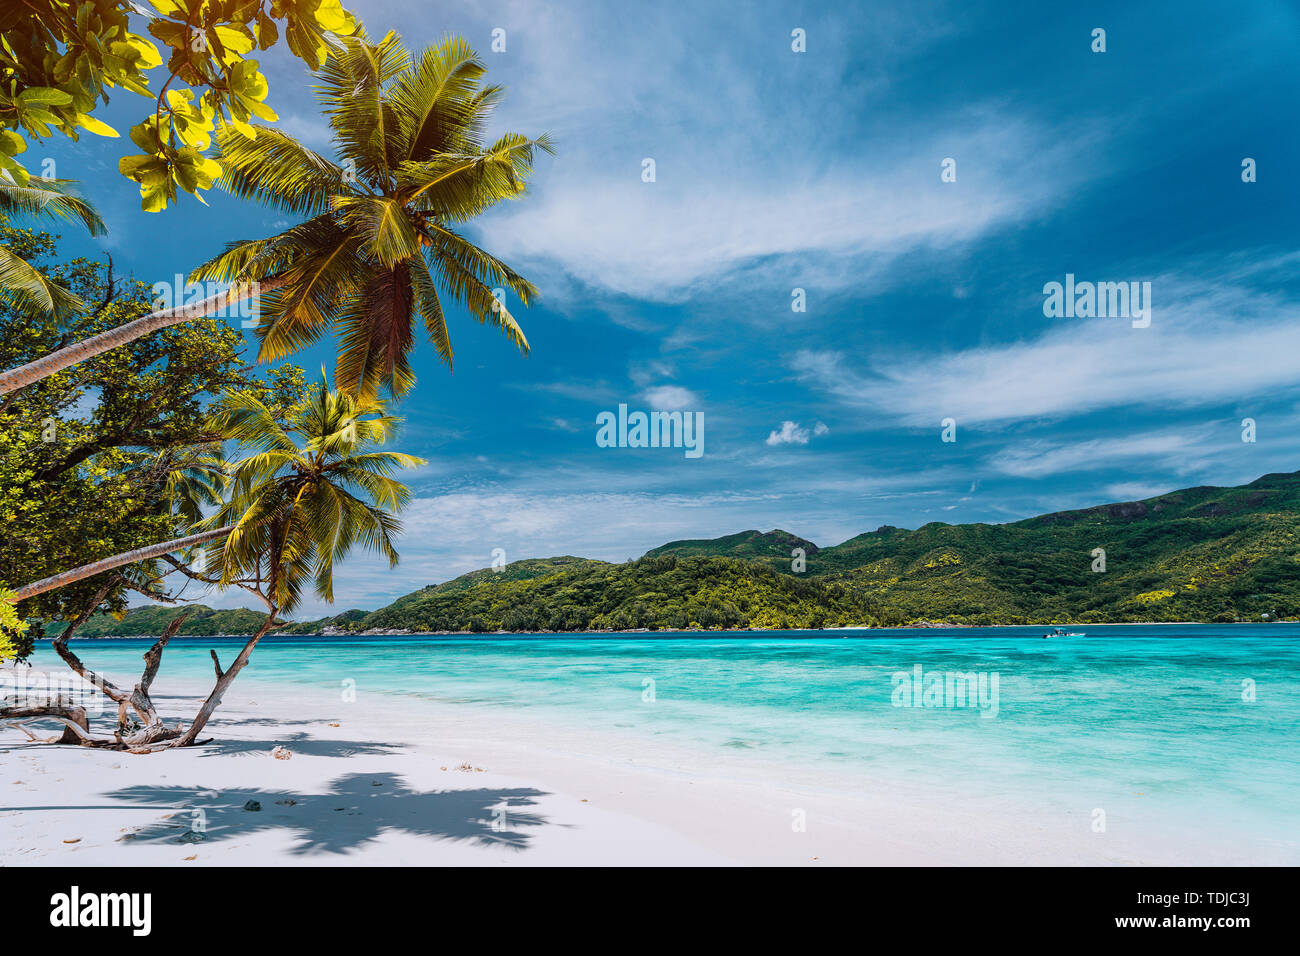 Luxury vacation on tropical island. Paradise beach with white sand and palm trees. Long distance travel tourism getaway concept Stock Photo